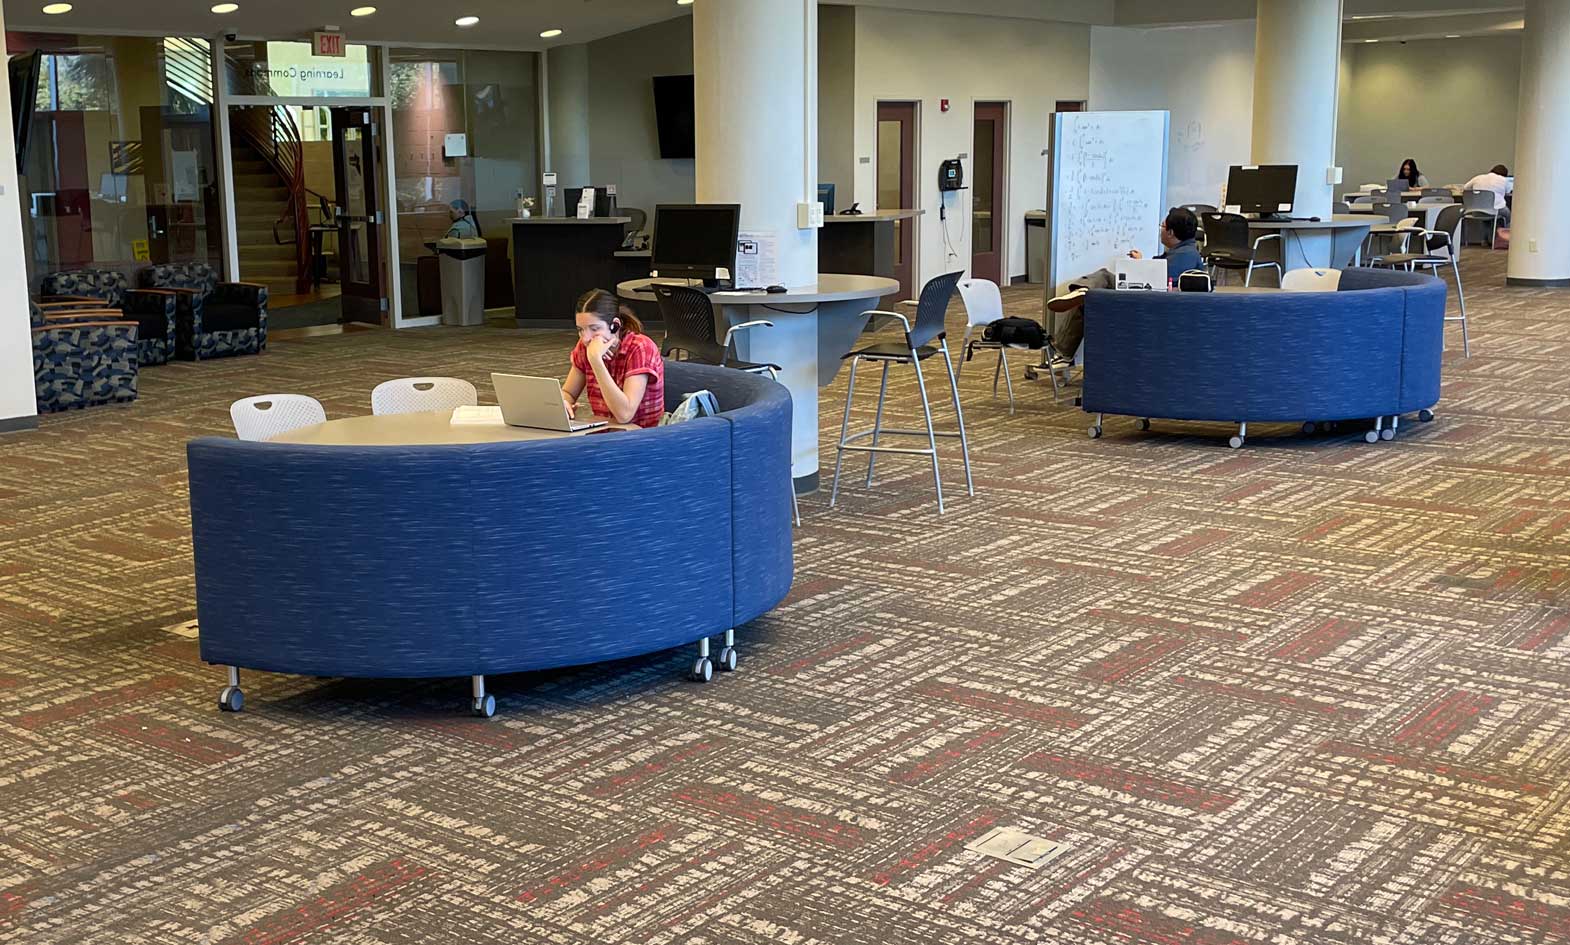 Student Success Center with flexible study booths on casters